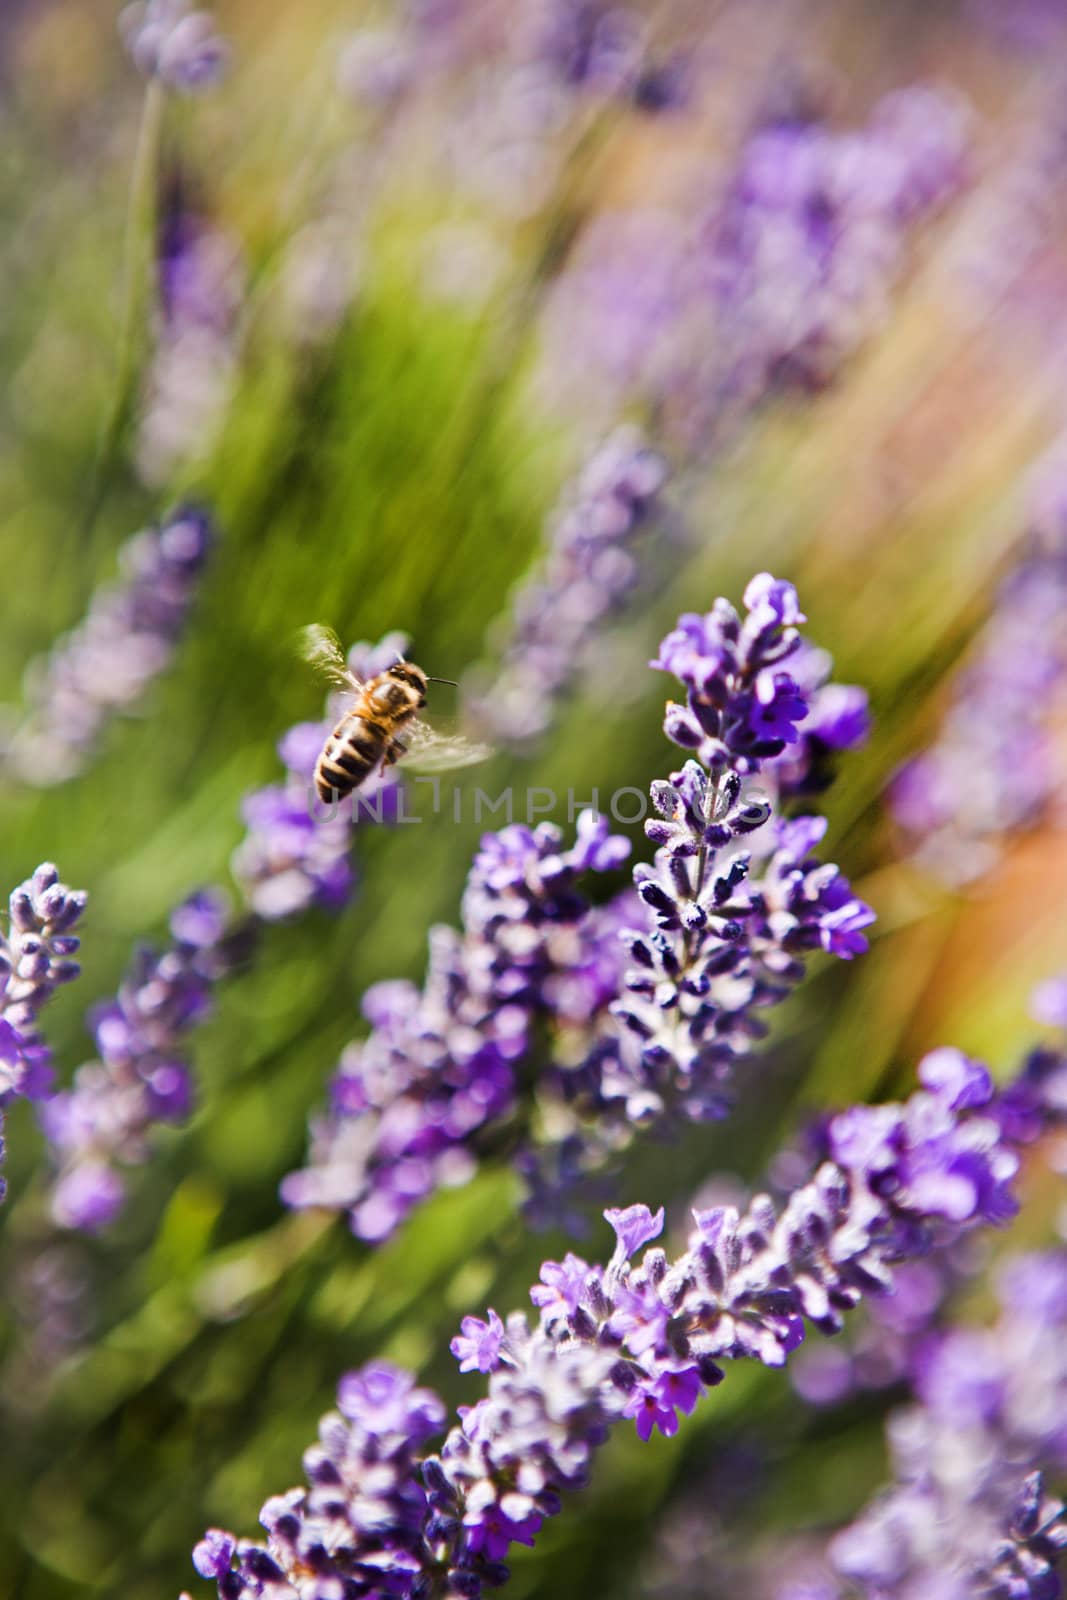 Honey bee foraging for pollen and nectar on purple lavender flowers with shallow dof